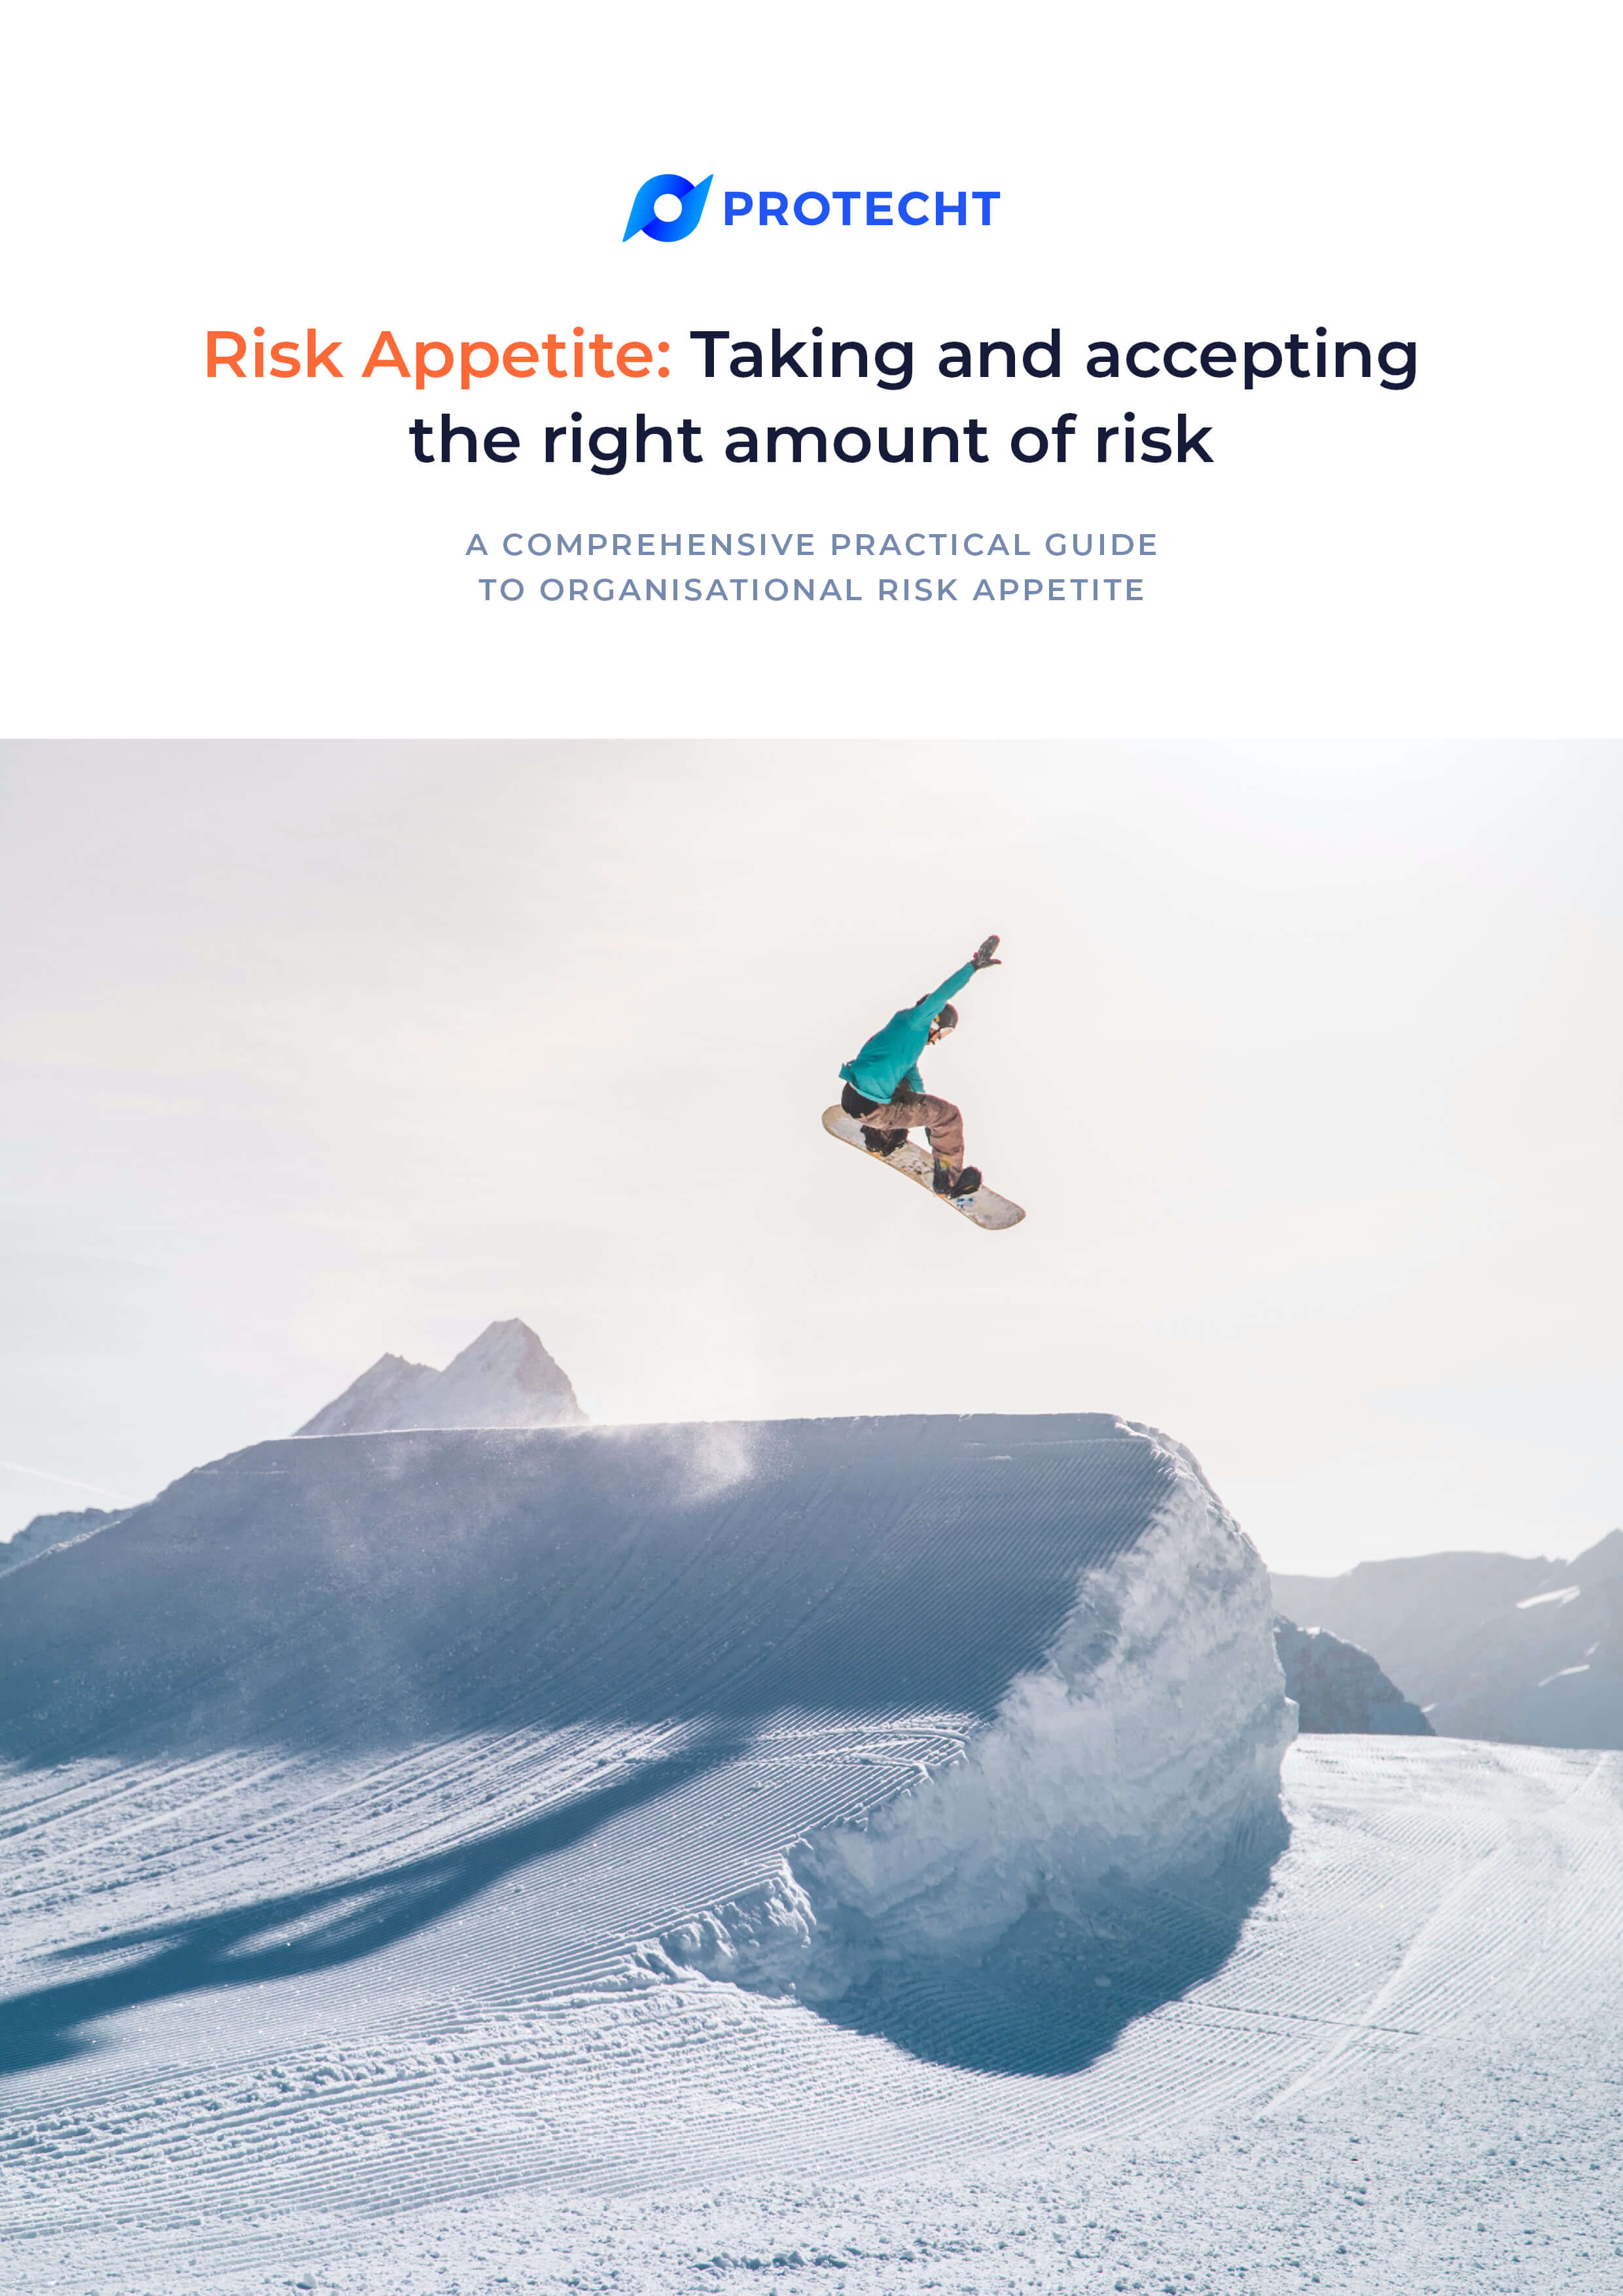 Risk Appetite: Taking and accepting the right amount of risk